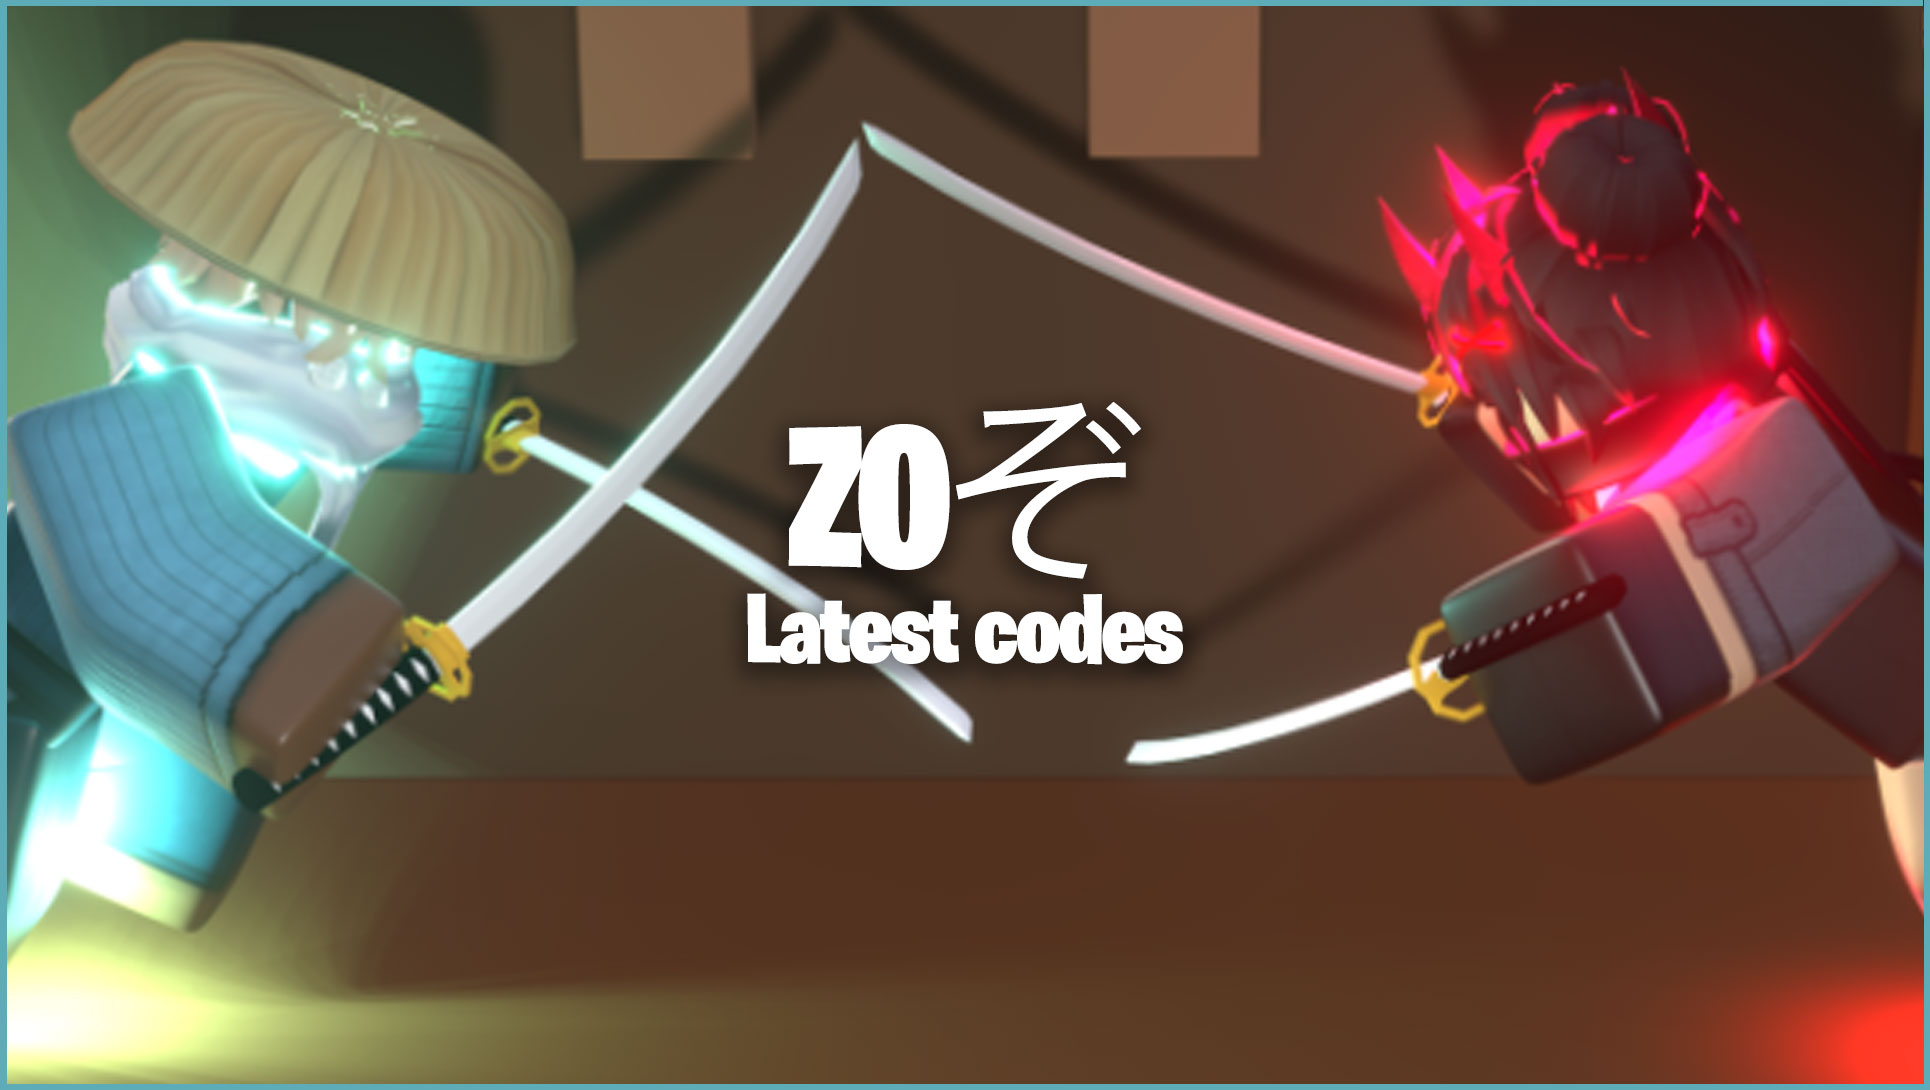 All Roblox Zo Samurai codes for free Shards & Spins in December